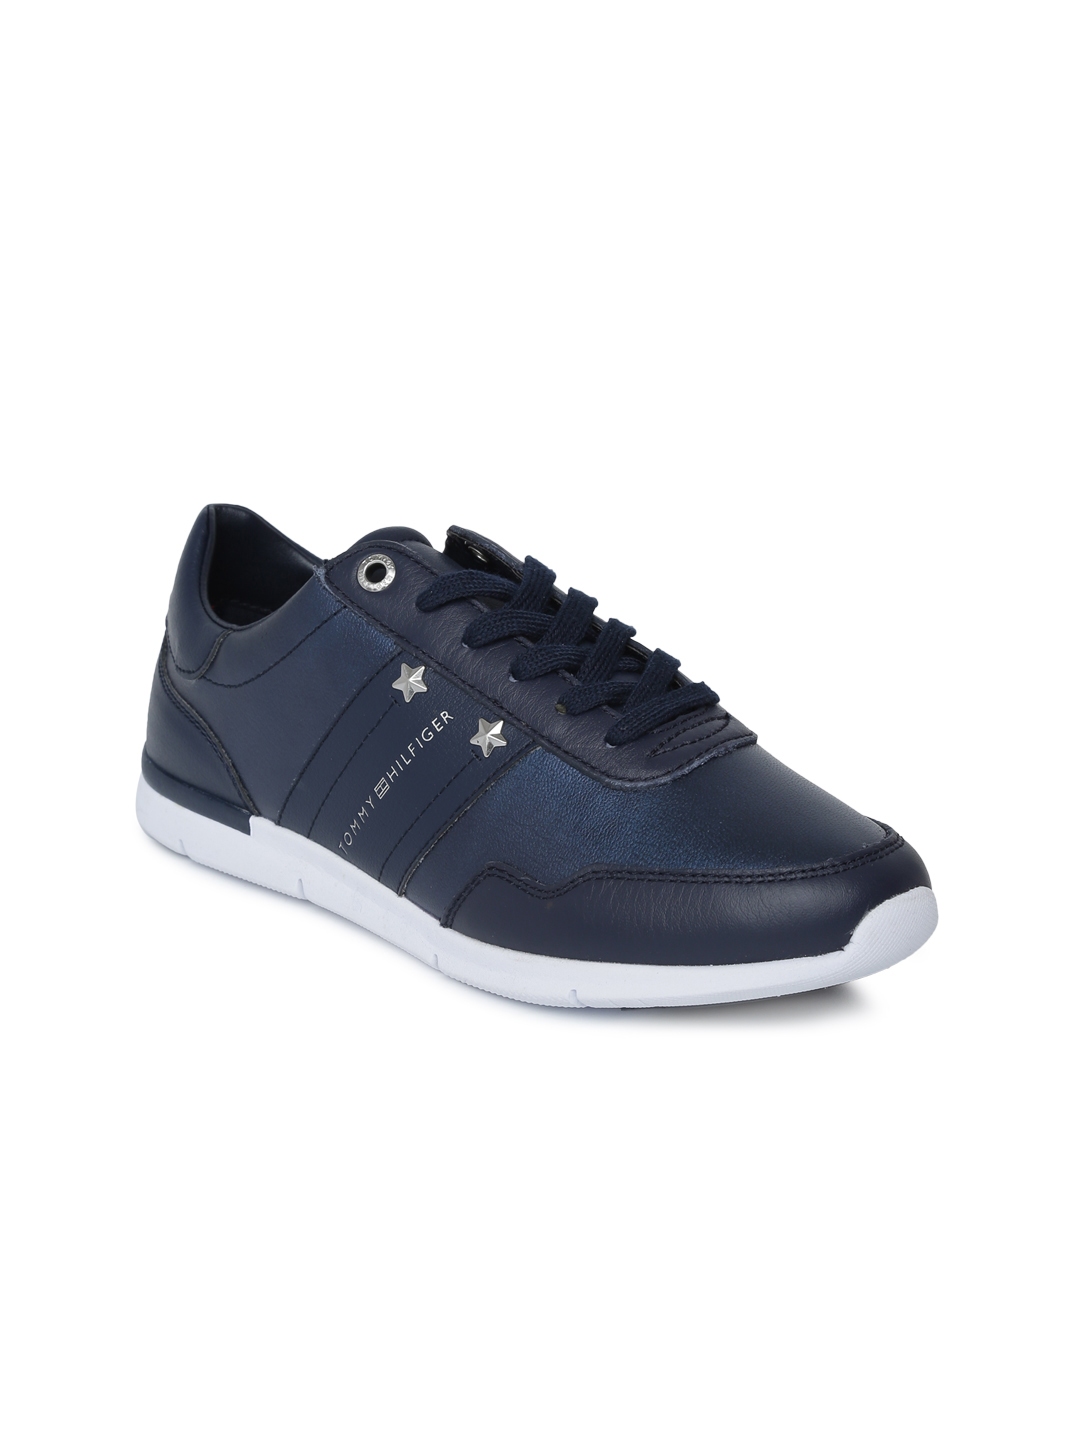 tommy hilfiger shoes womens 2019